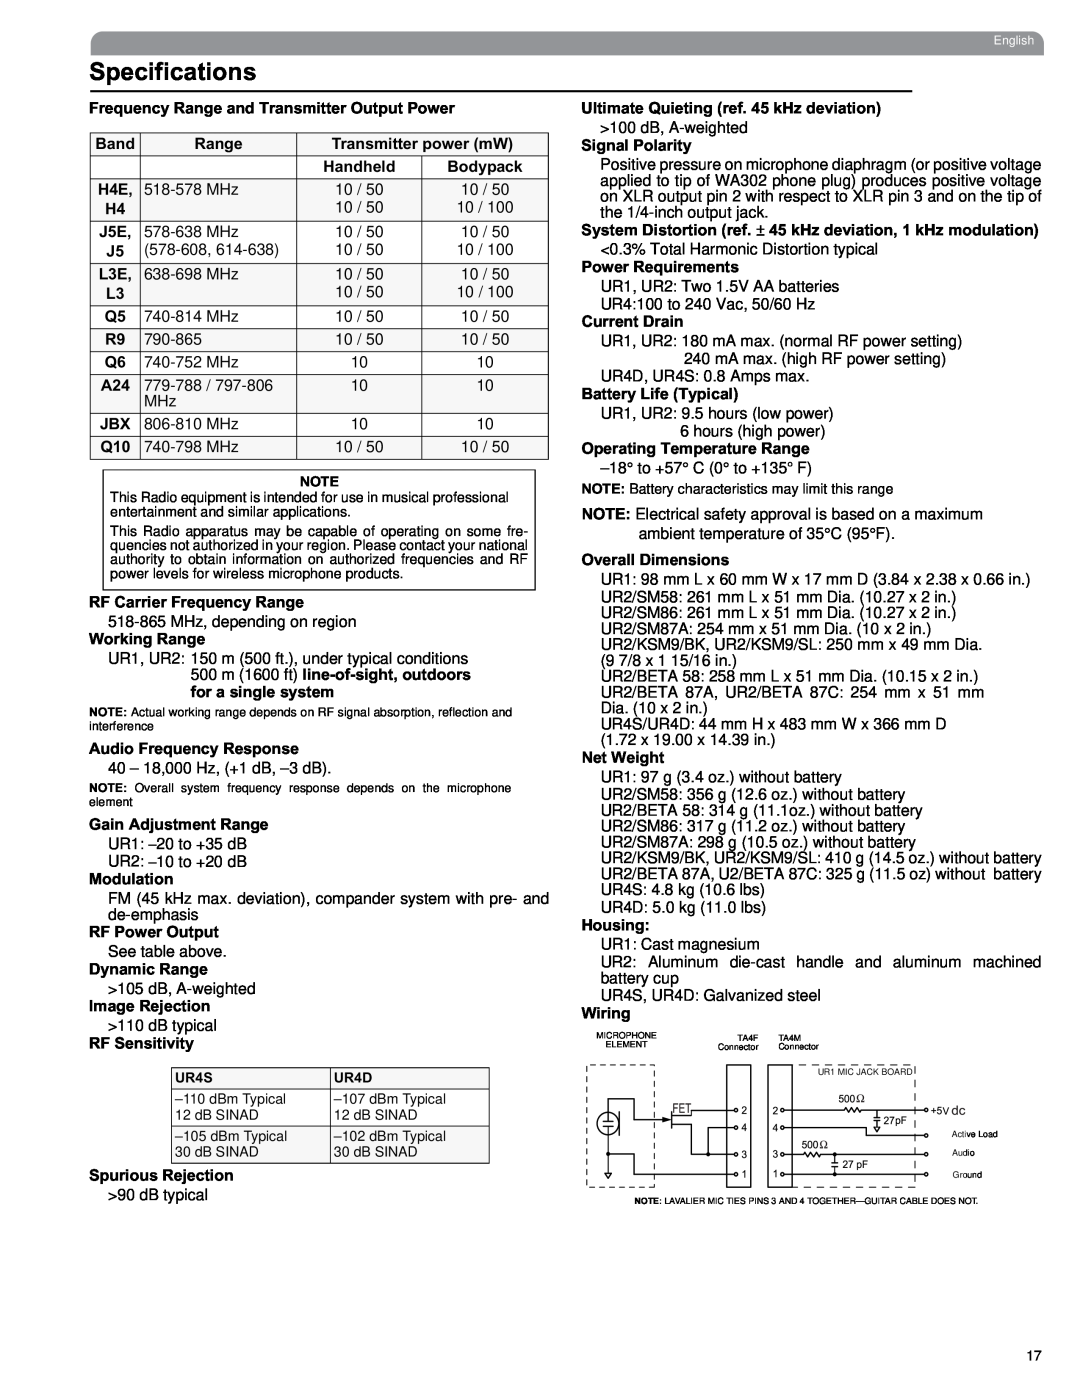 Shure UHF manual Specifications 